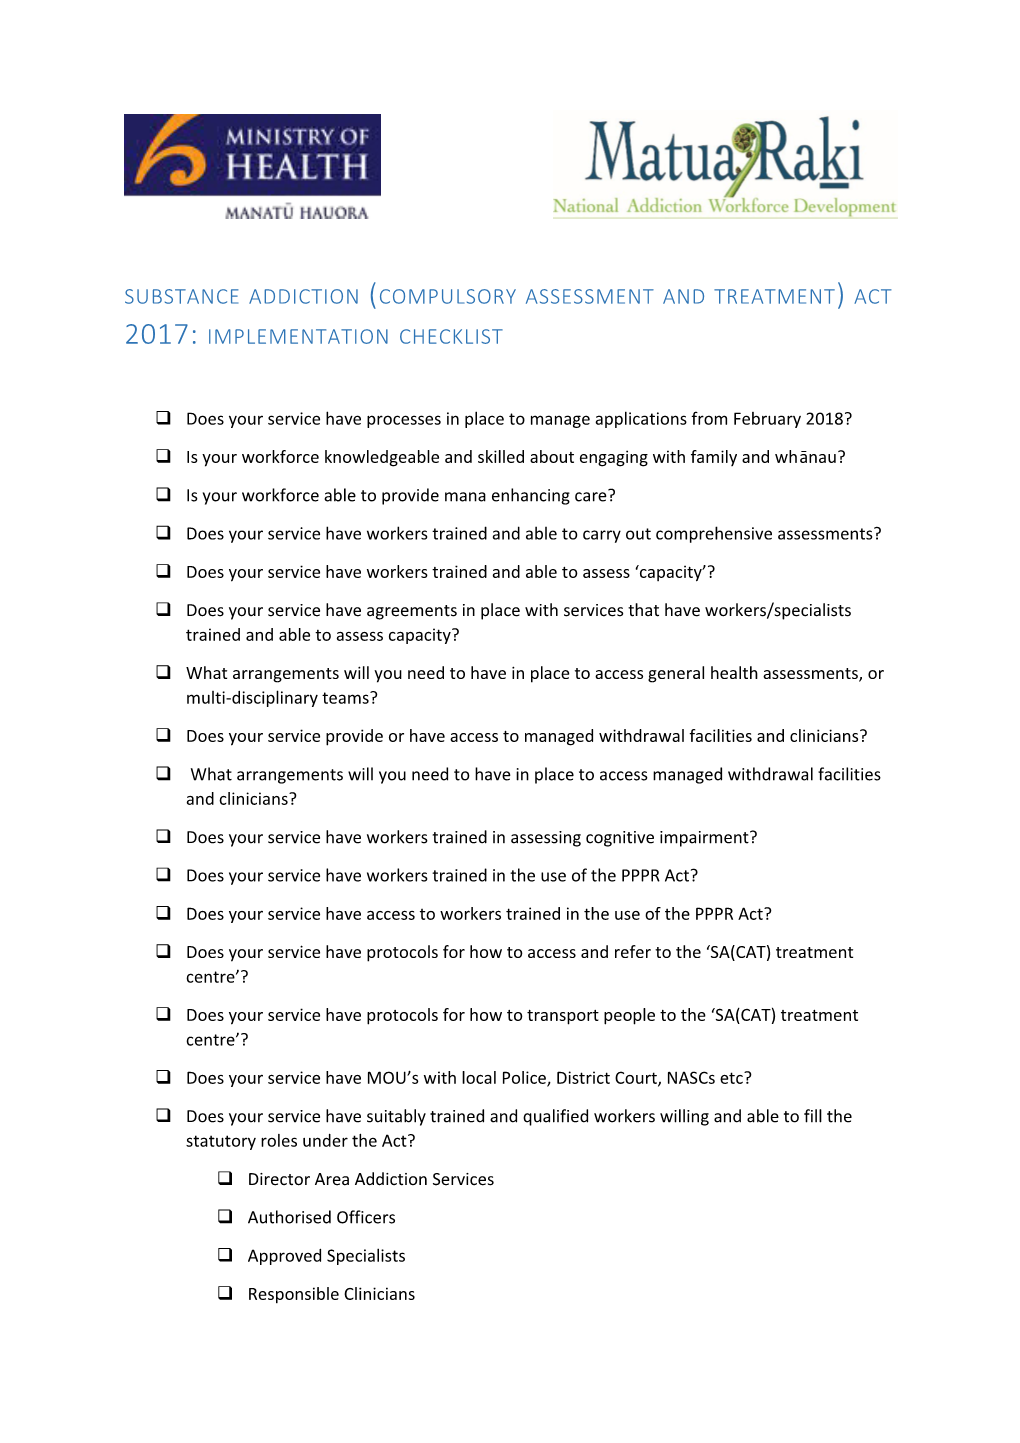 Substance Addiction (Compulsory Assessment and Treatment) Act 2017: Implementation Checklist